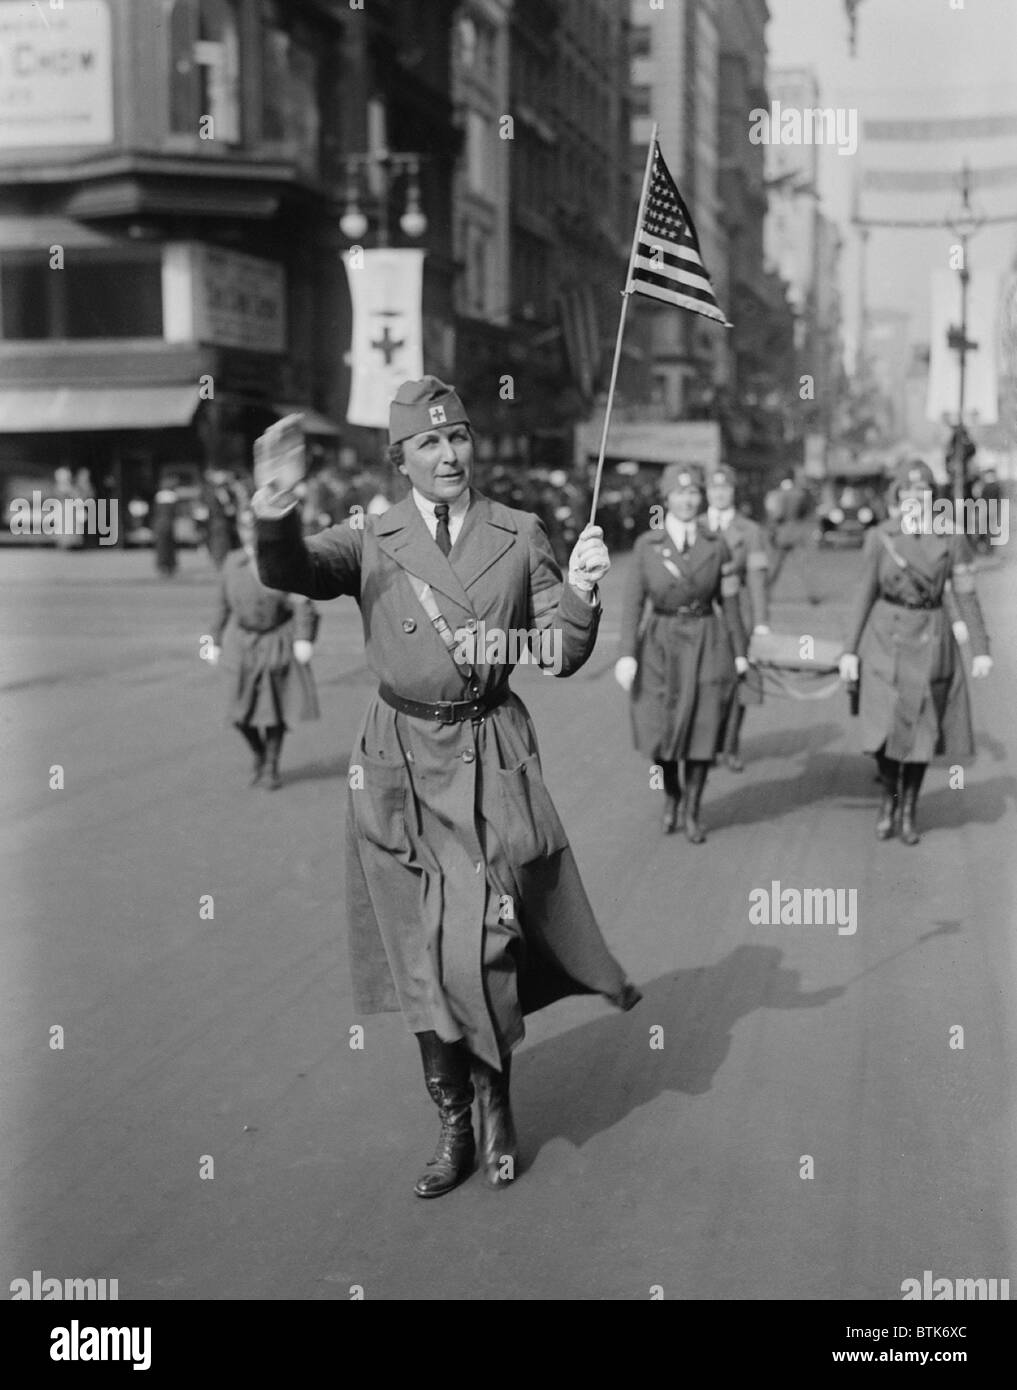 Daisy Harriman (1870-1967), parading in New York, wearing a Red Cross uniform. During the World War I, she organized the American Red Cross Women's Motor Corps and directed them in France. Ca. 1917-18. Stock Photo